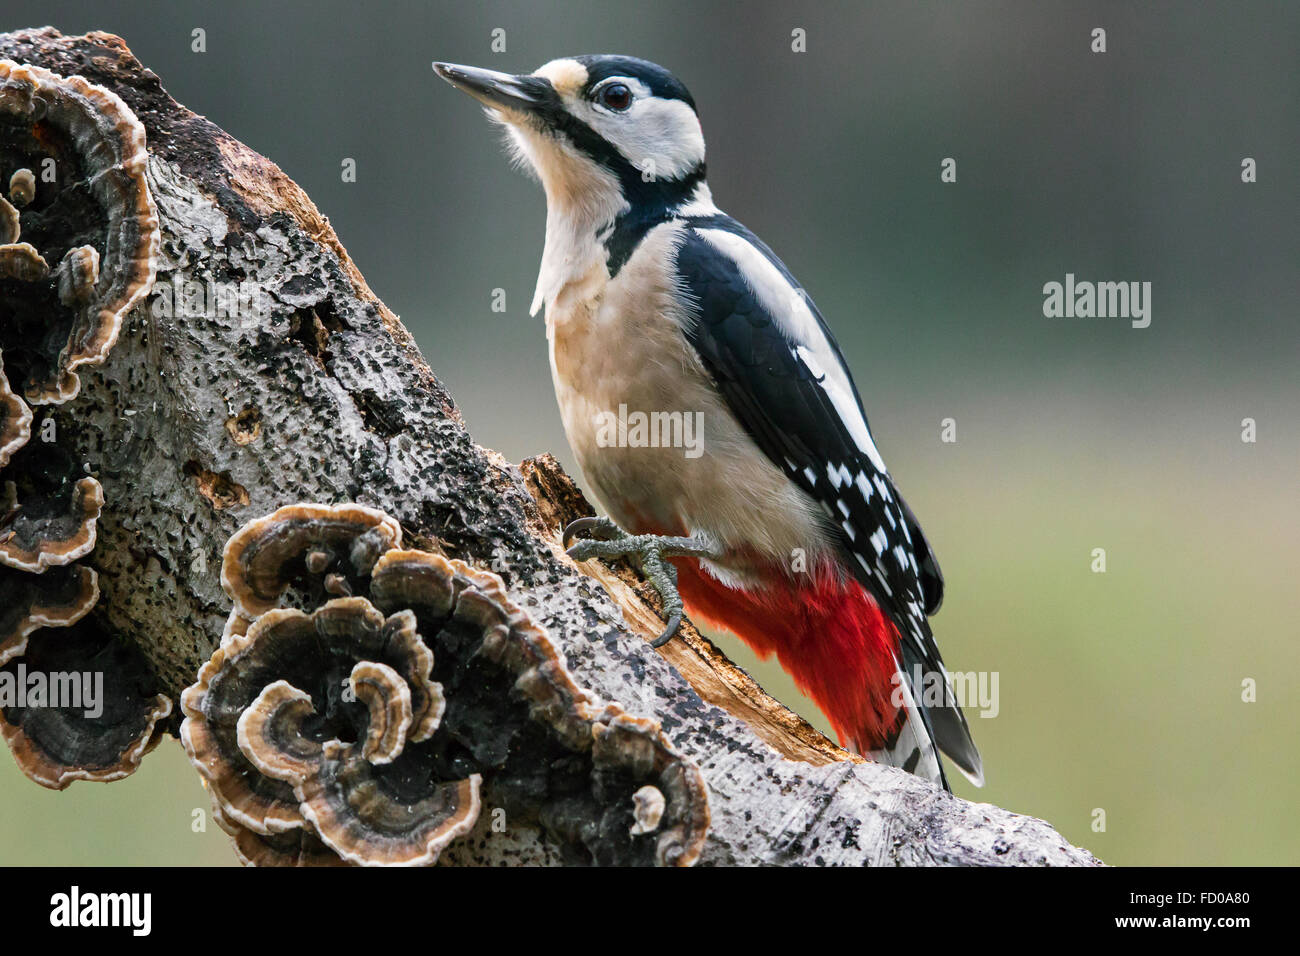 Great Spotted Woodpecker / Greater Spotted Woodpecker (Dendrocopos major) male foraging on tree trunk covered in fungi Stock Photo